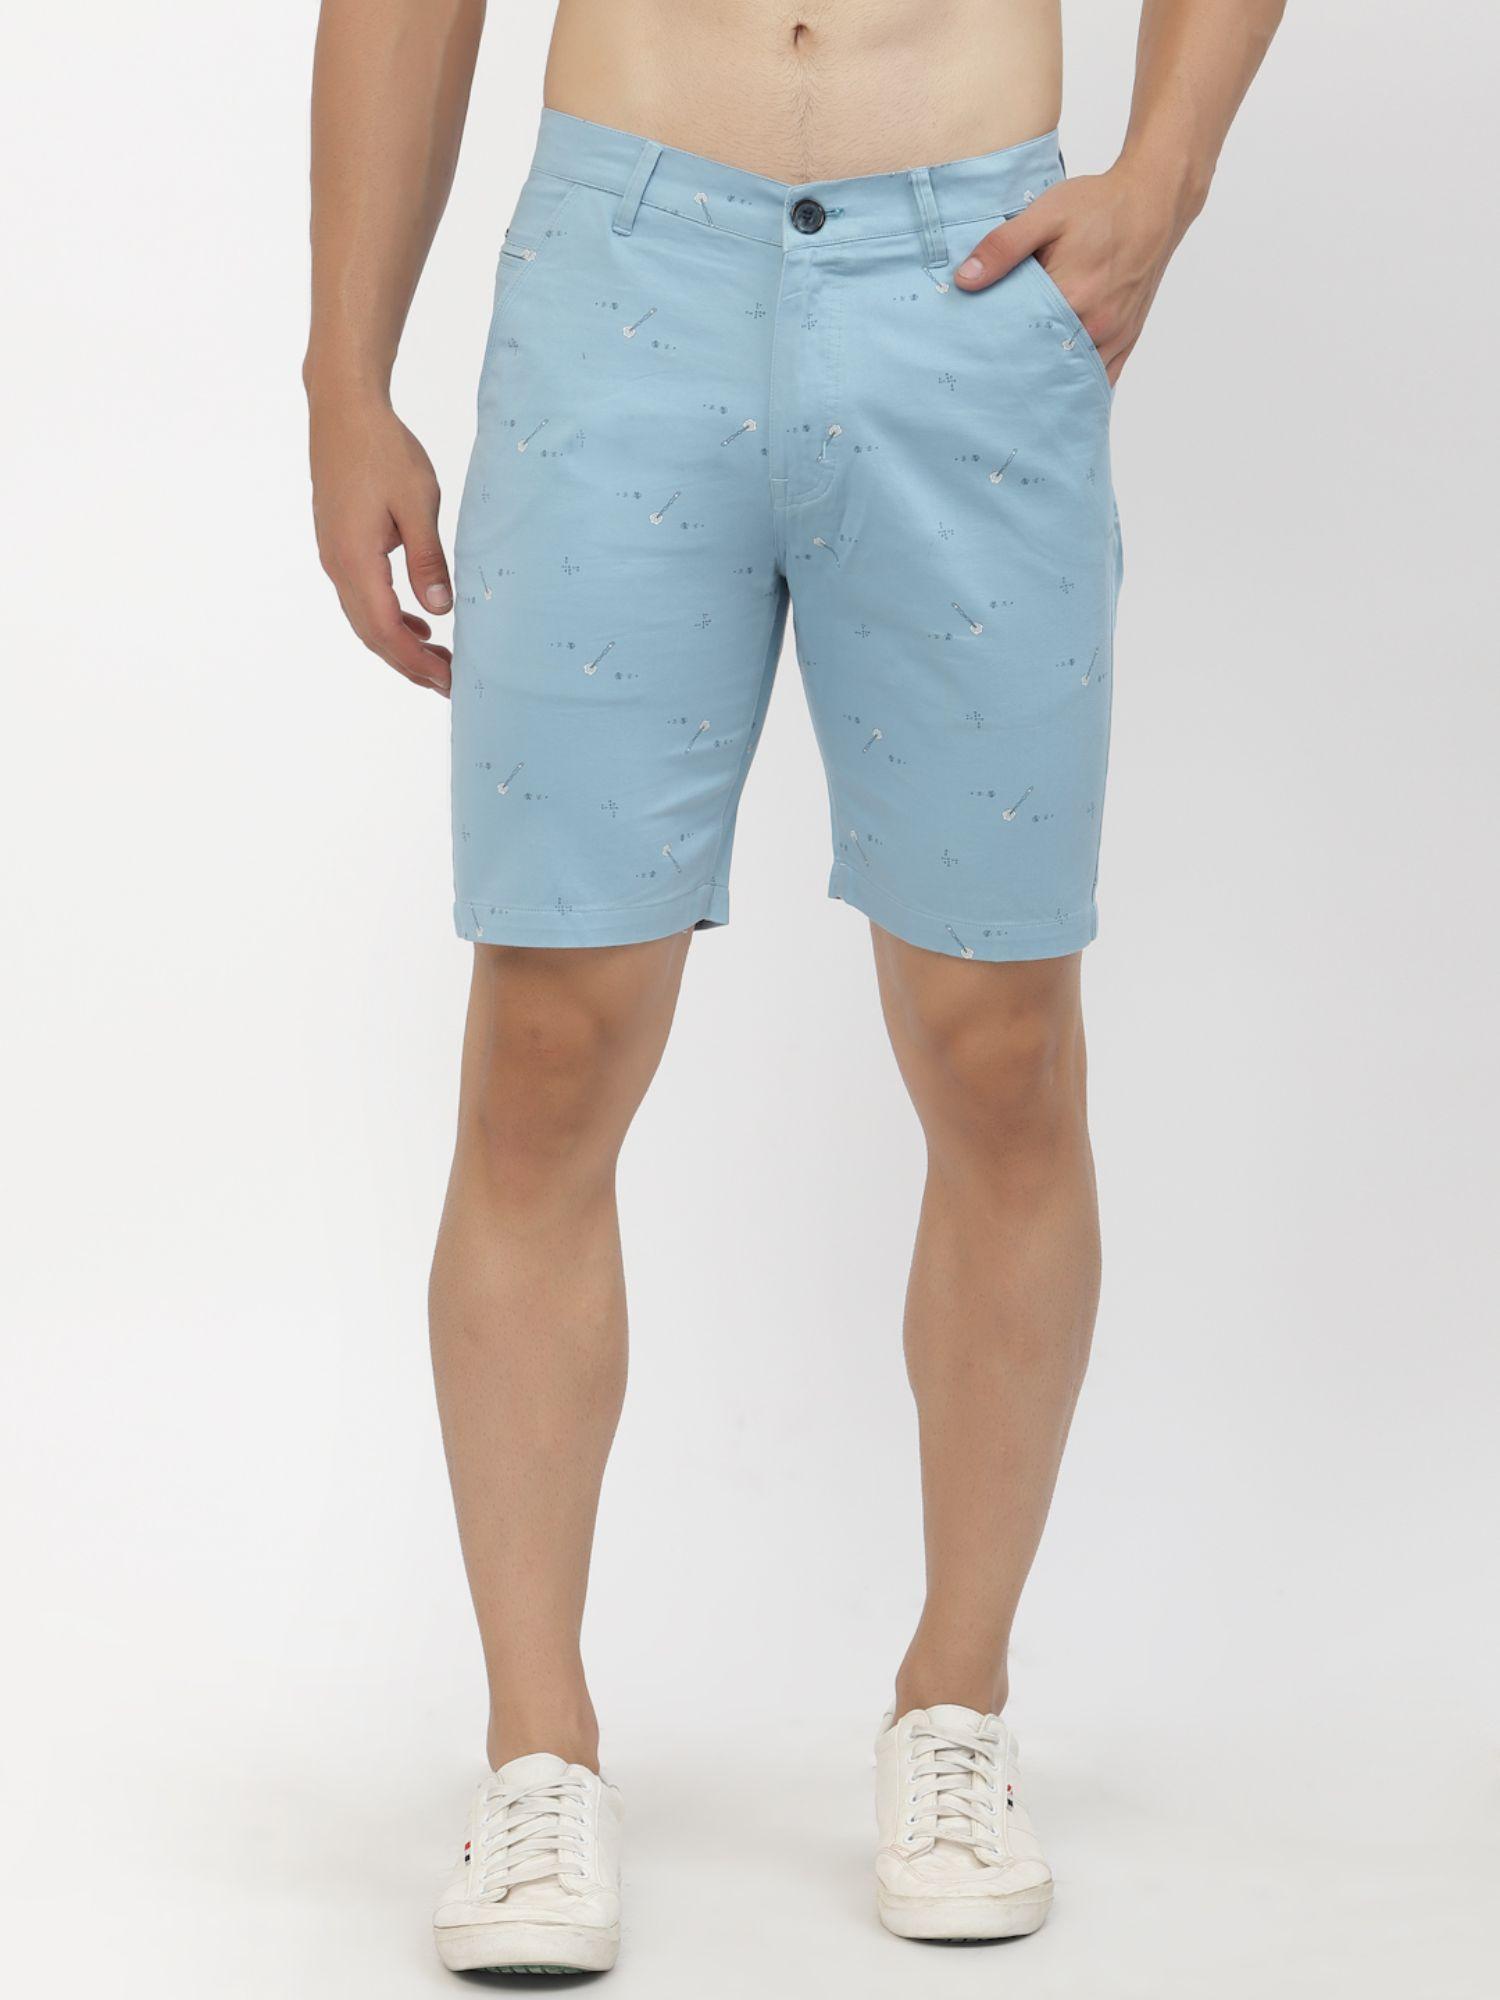 cotton chino shorts for men - blue